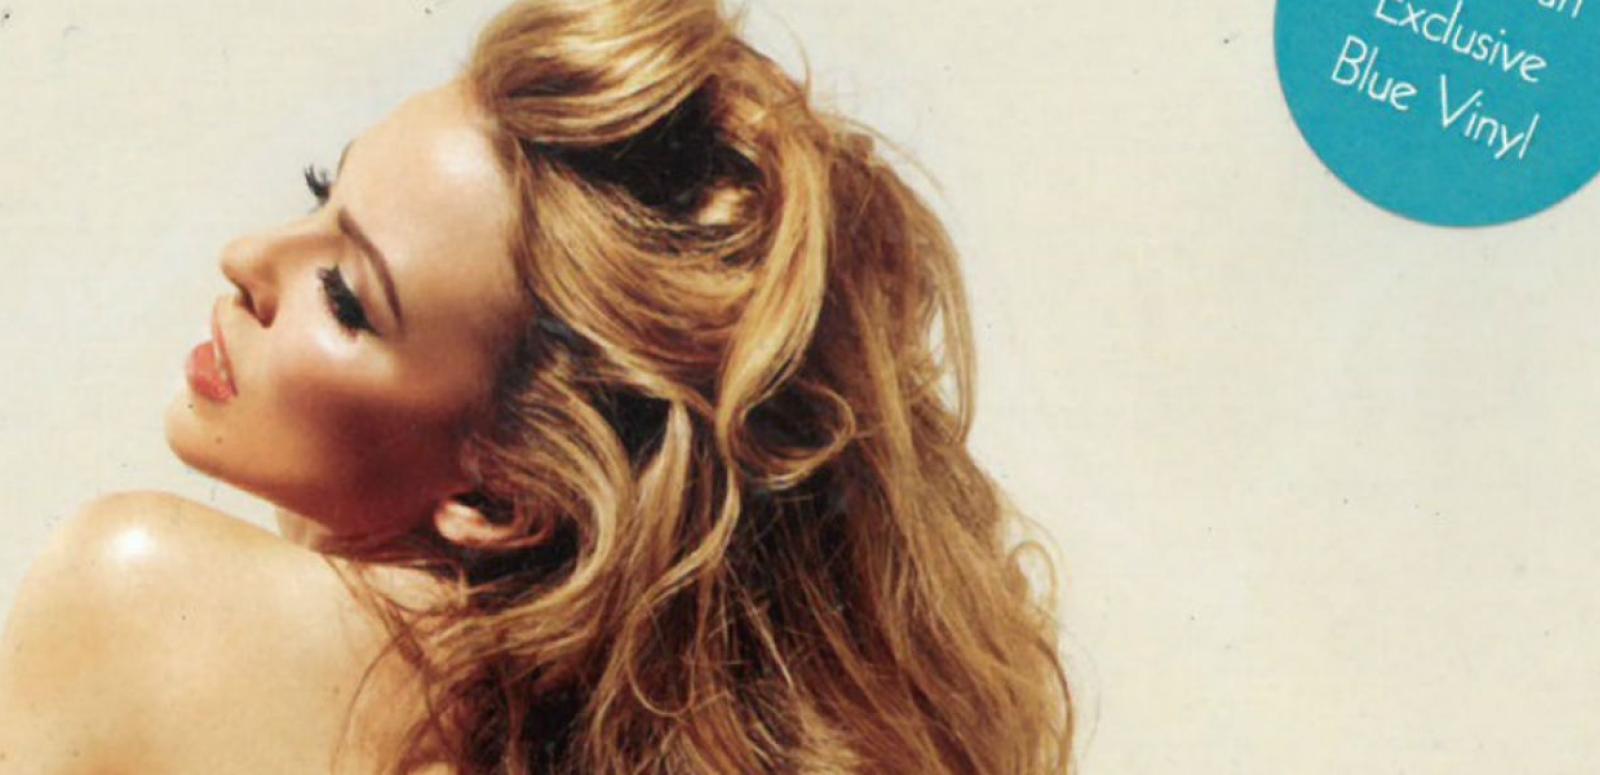 Cropped image of Kylie Minogue album cover Into the Blue